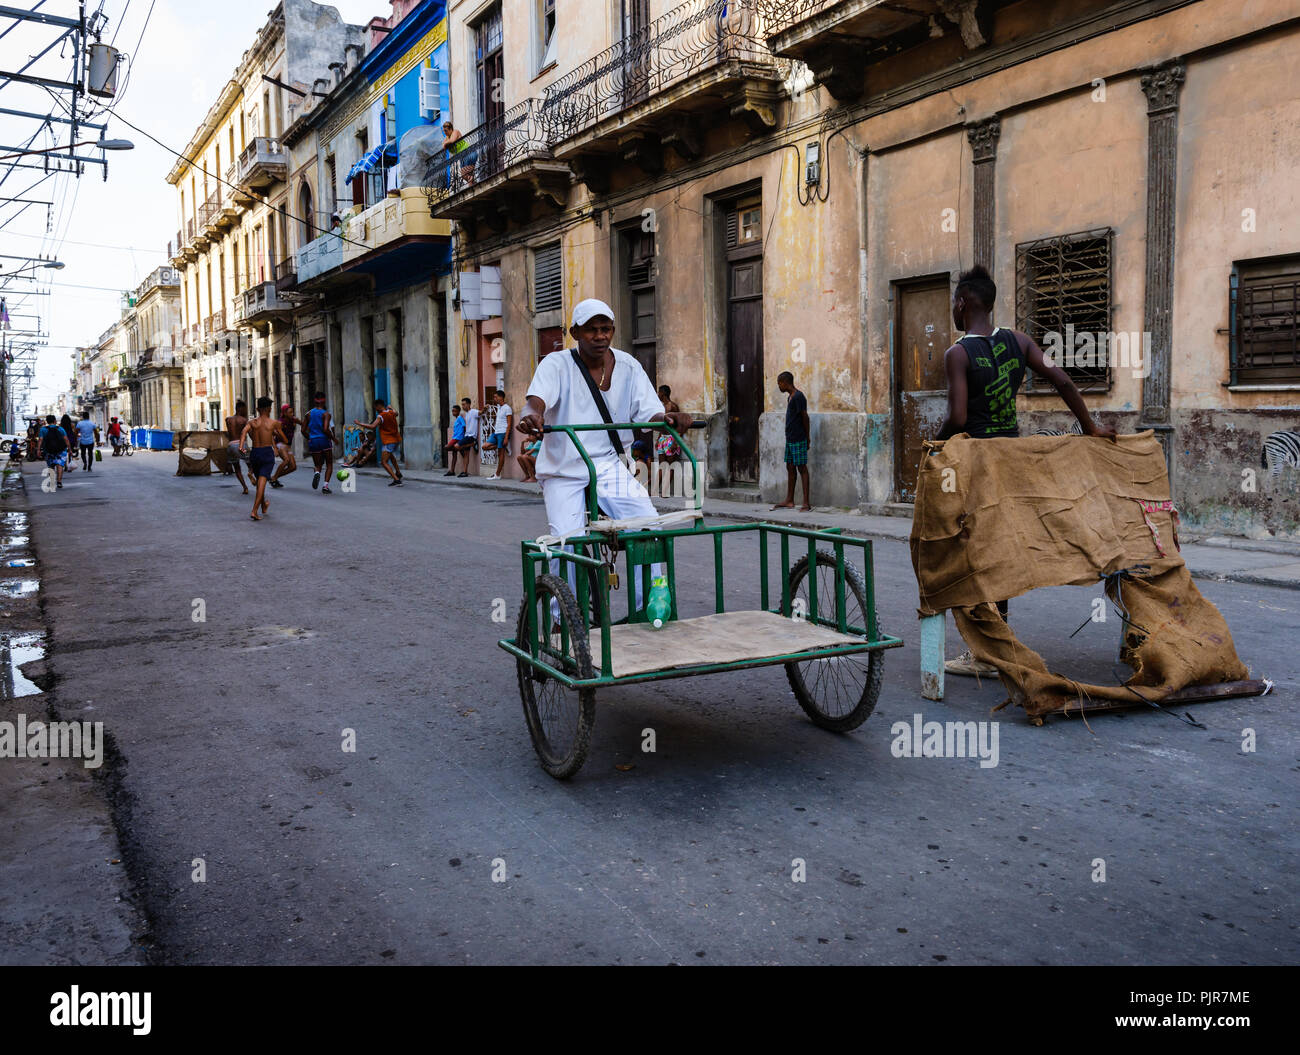 HAVANA, CUBA - CIRCA MAY 2017:  Boys playing soccer in the streets of  Havana. This is very typical around town. Stock Photo